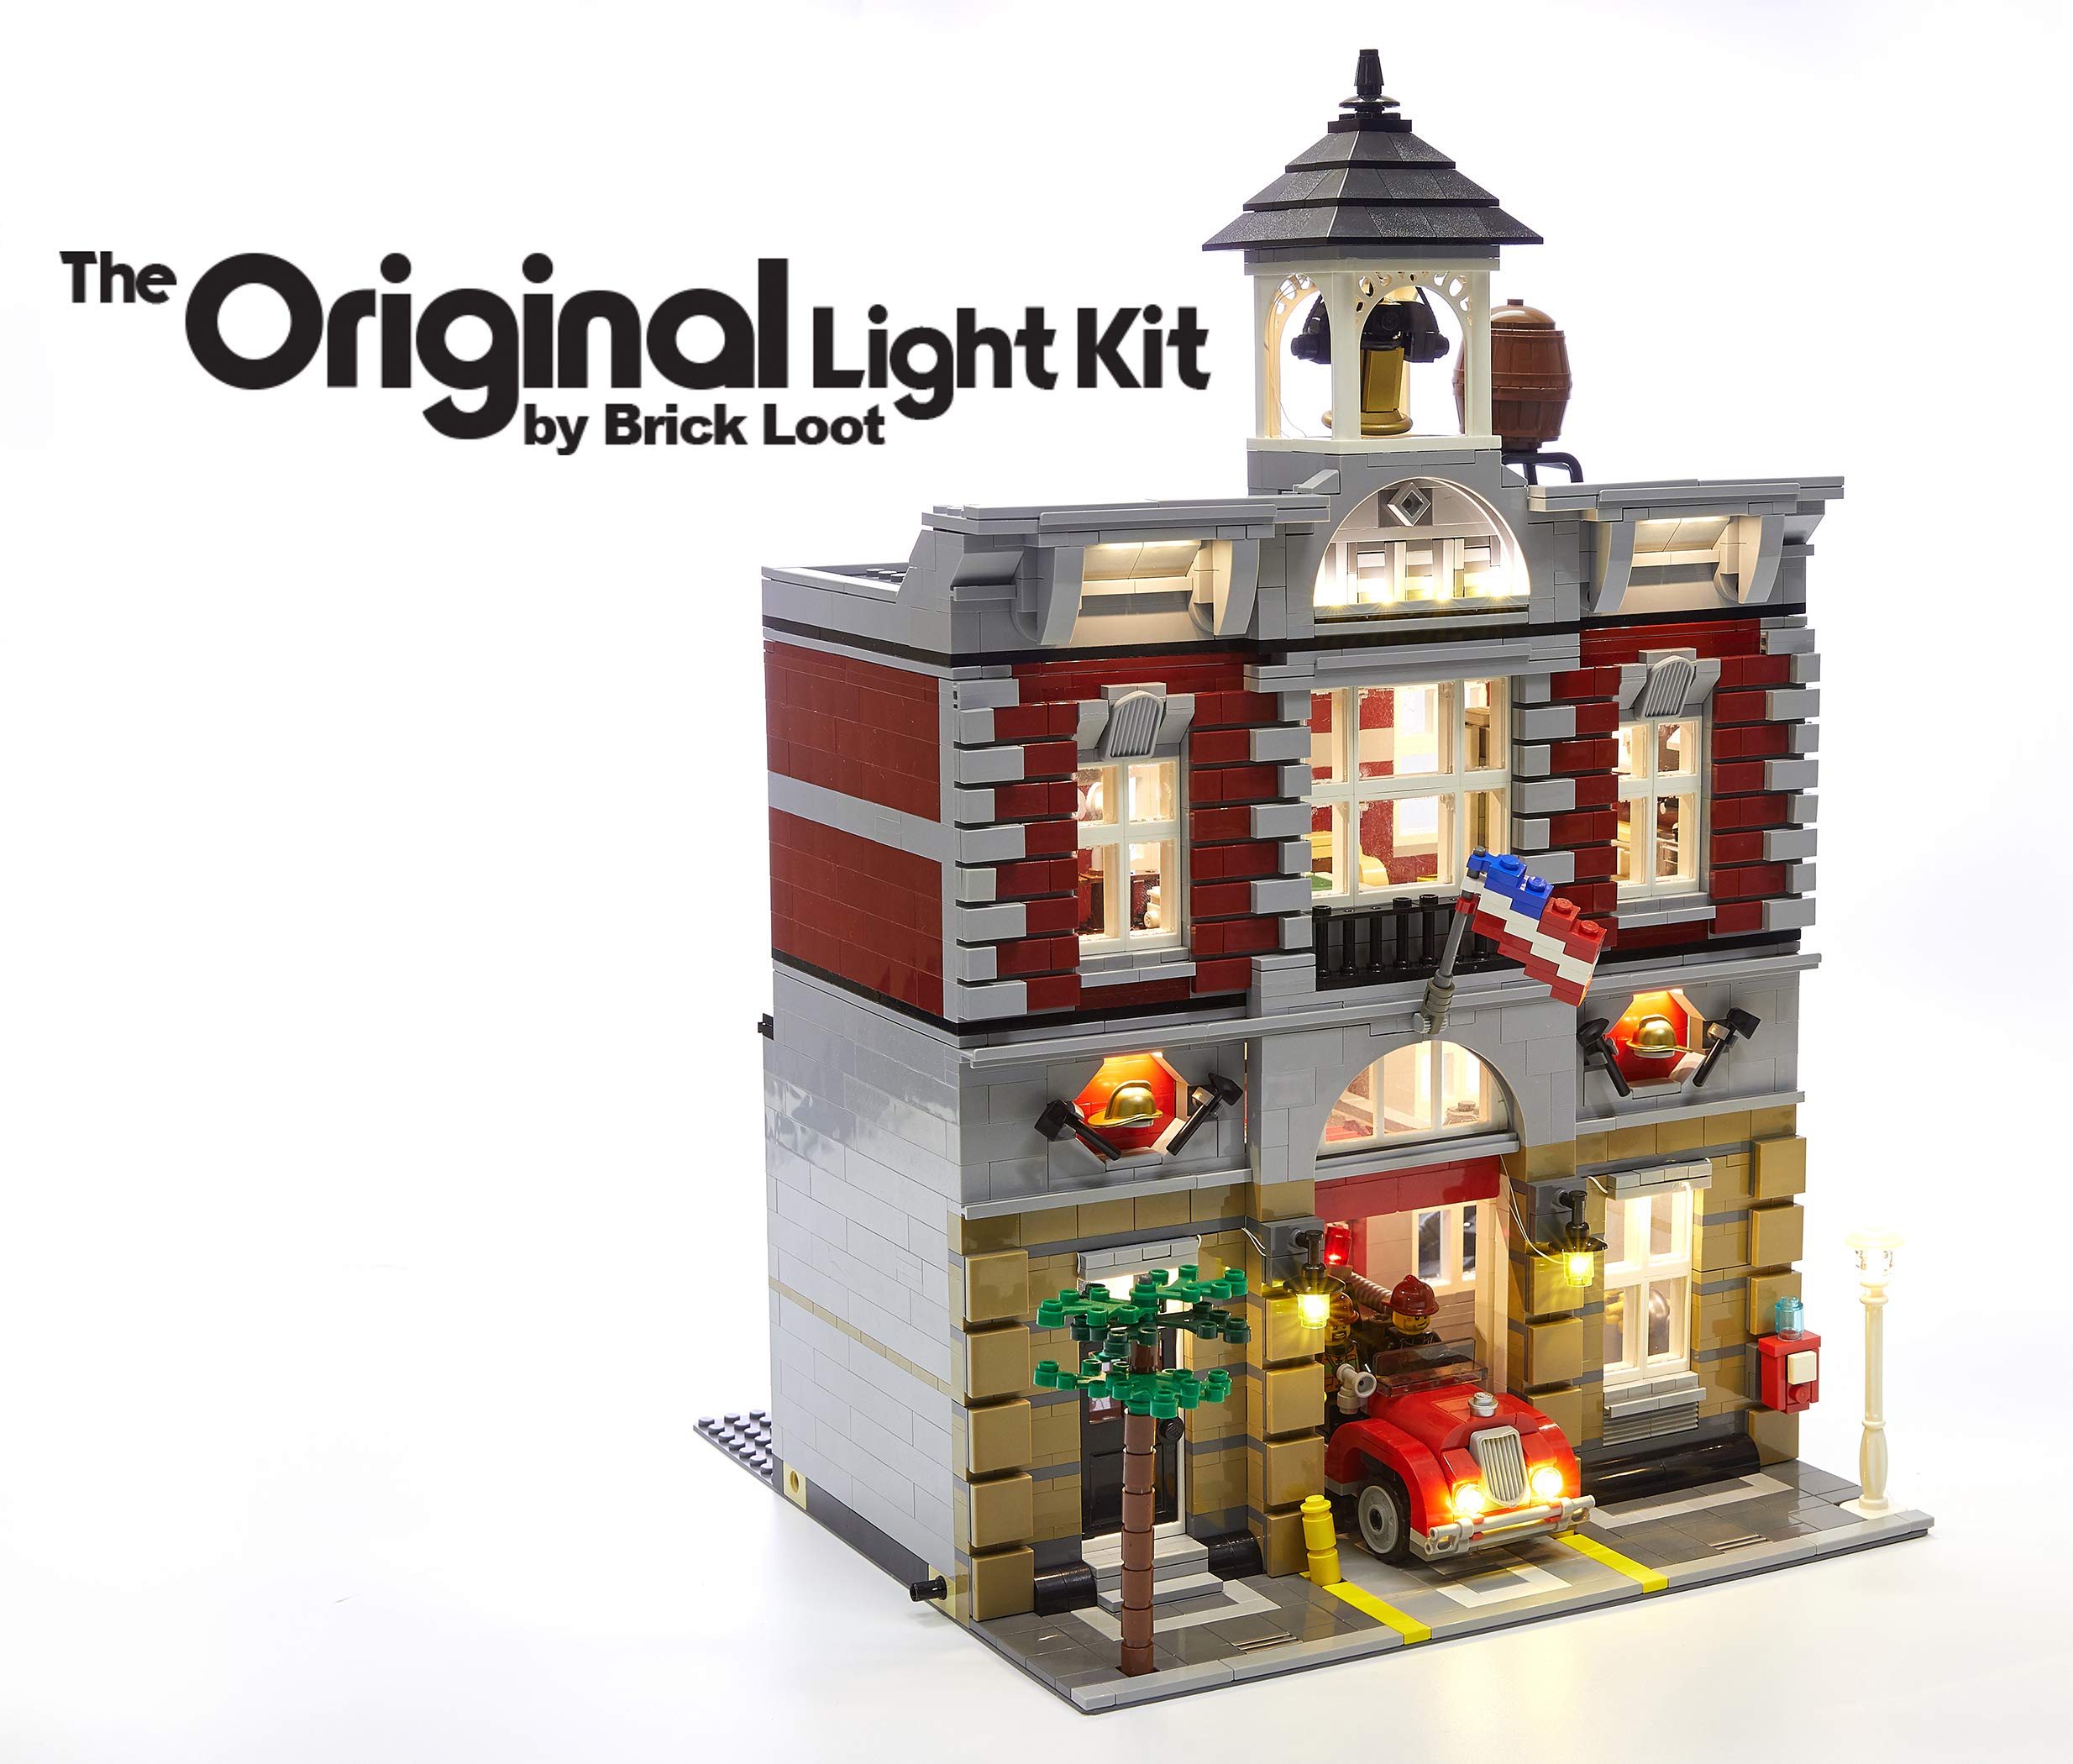 Brick Loot Lighting Kit for Your Lego Fire Brigade Set 10197 (LEGO set not included) - image 2 of 6